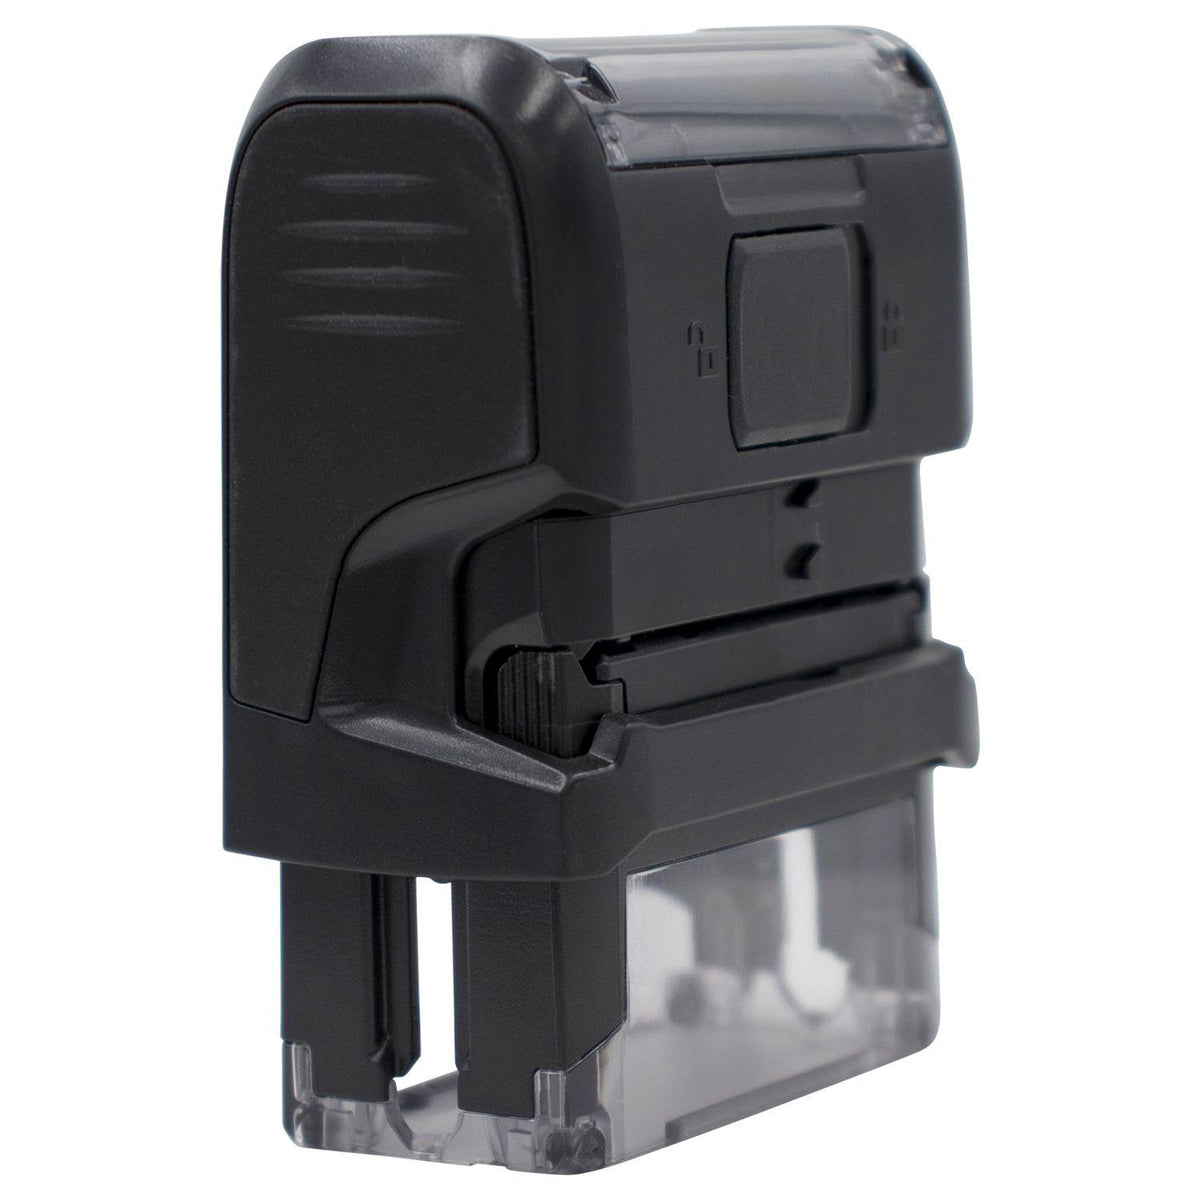 Self-Inking Curley Past Due Stamp - Engineer Seal Stamps - Brand_Trodat, Impression Size_Small, Stamp Type_Self-Inking Stamp, Type of Use_Business, Type of Use_General, Type of Use_Office